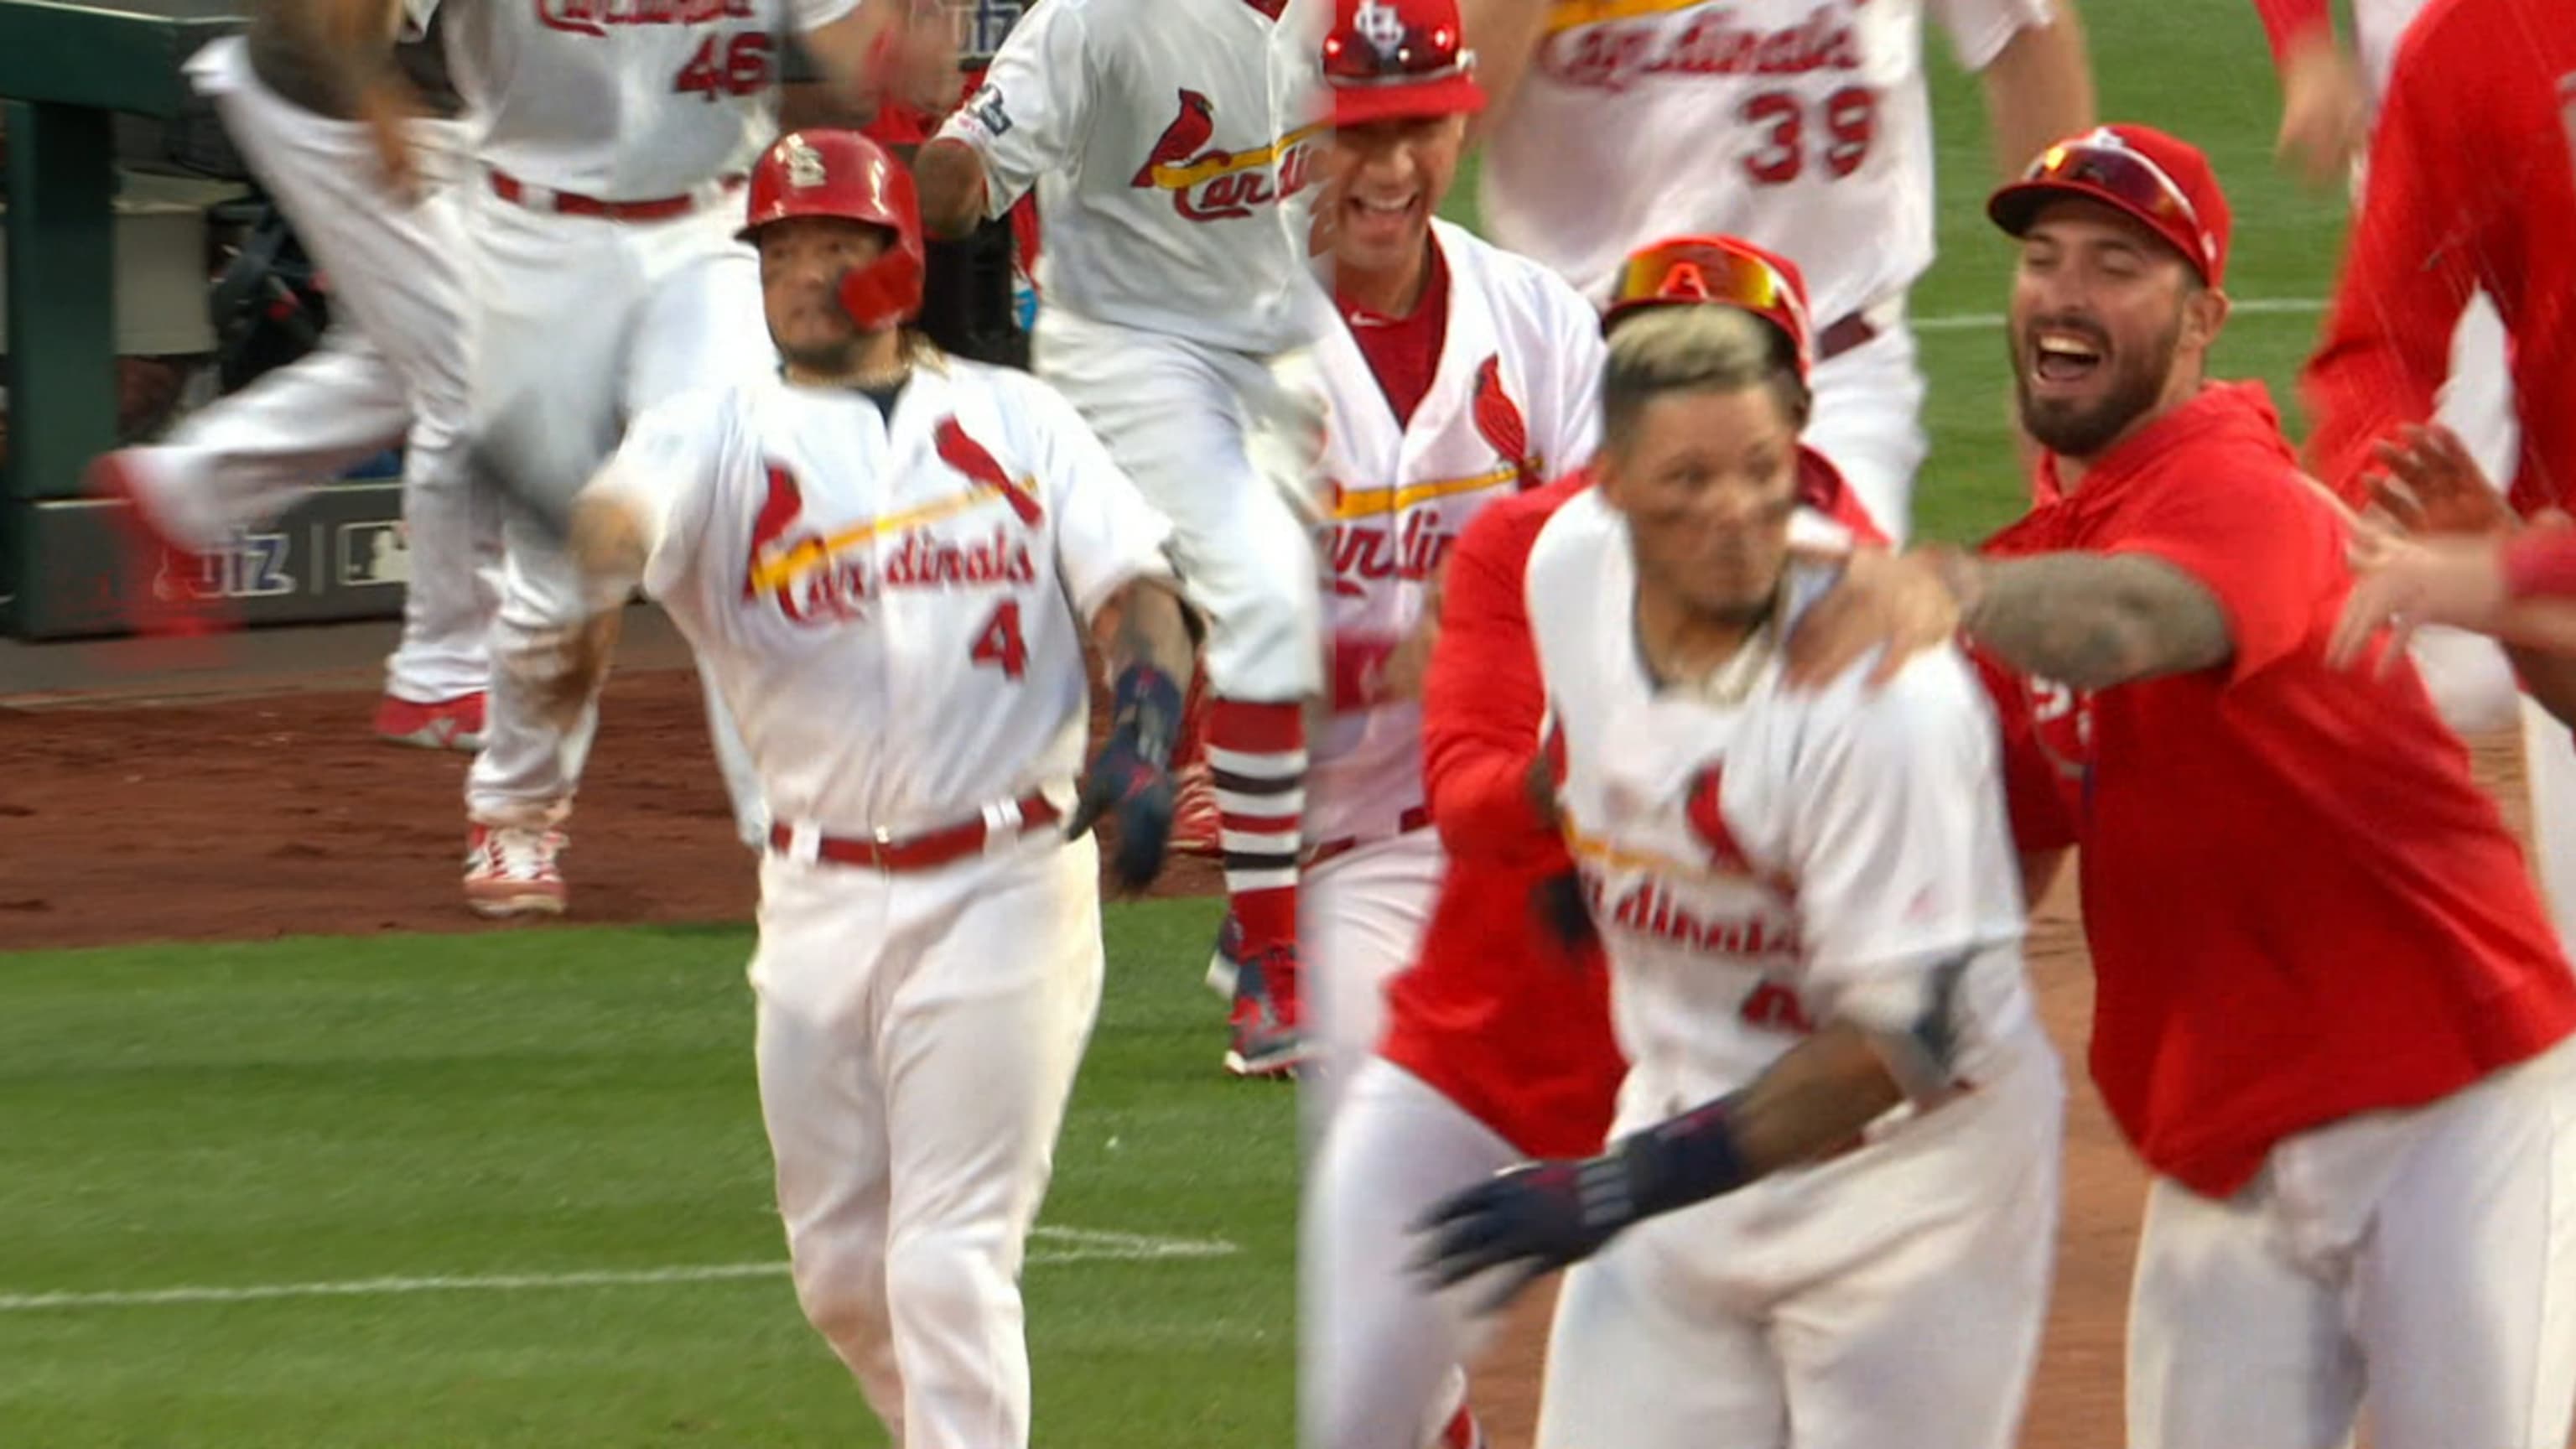 St. Louis Cardinals - Today's #STLCards Fan of the Day is Yadi